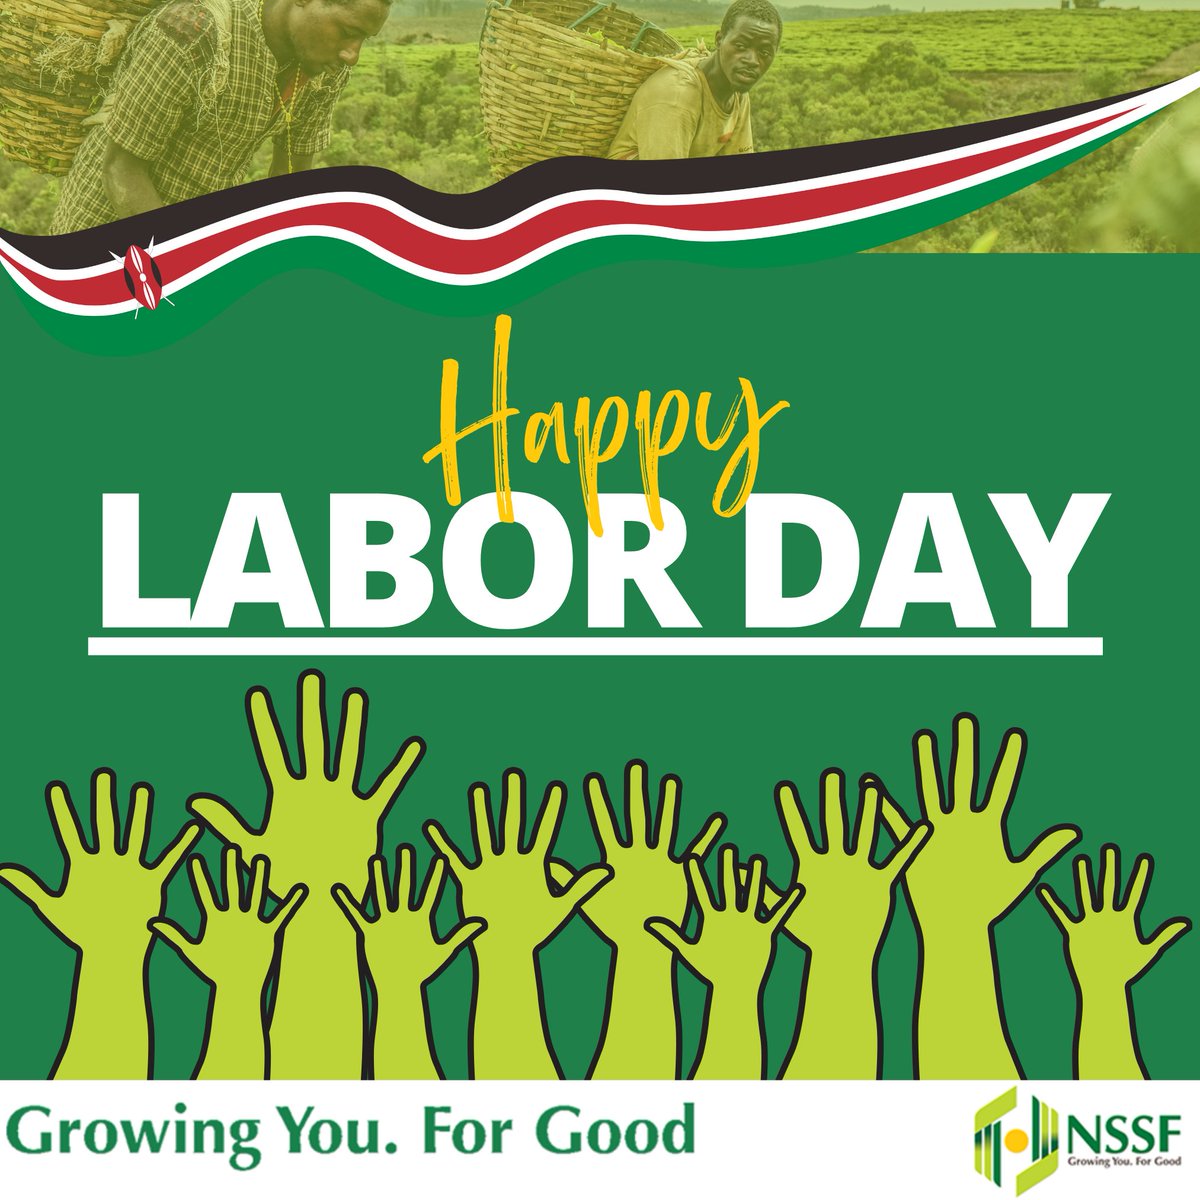 To find joy in work is to find the fountain of youth. Happy Labour Day. May God bless the work of your hands. #LeavingNoOneBehind